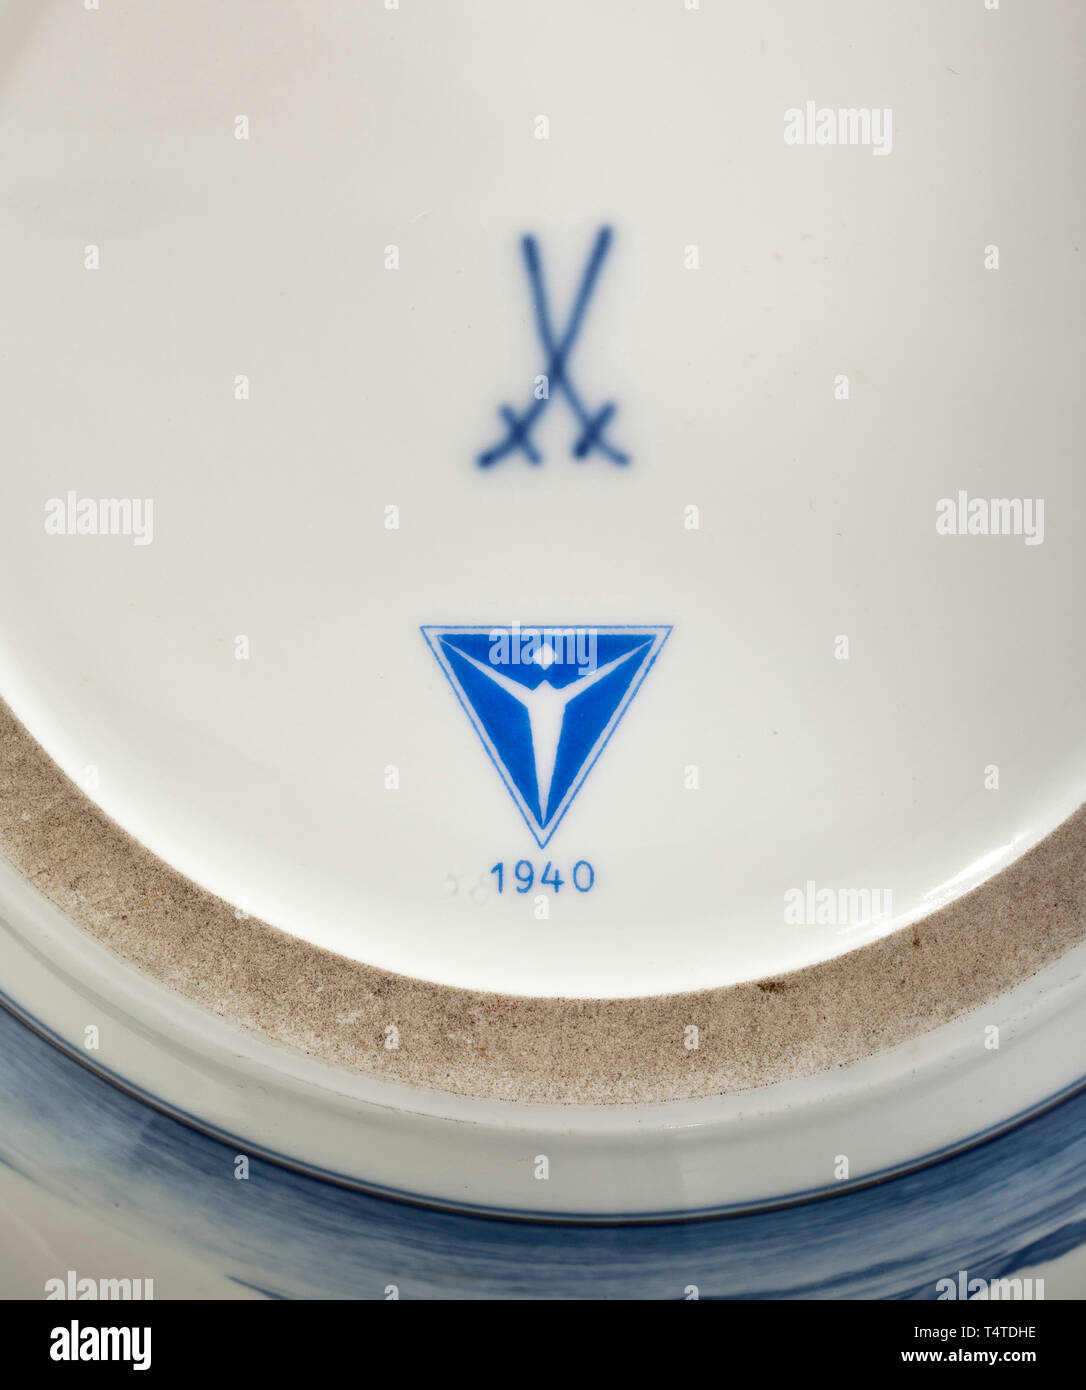 A large Meissen vase from the Junkers factory, 1940, White porcelain with cobalt blue decoration, a thin silver band below the rim. A Ju 90 (D-AURE) and a Ju 88 in the midst of surrounding clouds above mountains each on one of the viewing sides. Blue sword mark, the company logo 'Junkers 1940' and a scratched number 'P.249' on the bottom. Height 43 cm. Prestigious vase in good to very good condition. Air Force, branch of service, branches of service, armed service, armed services, military, militaria, air forces, object, objects, stills, clipping, clippings, cut out, cut-ou, Editorial-Use-Only Stock Photo